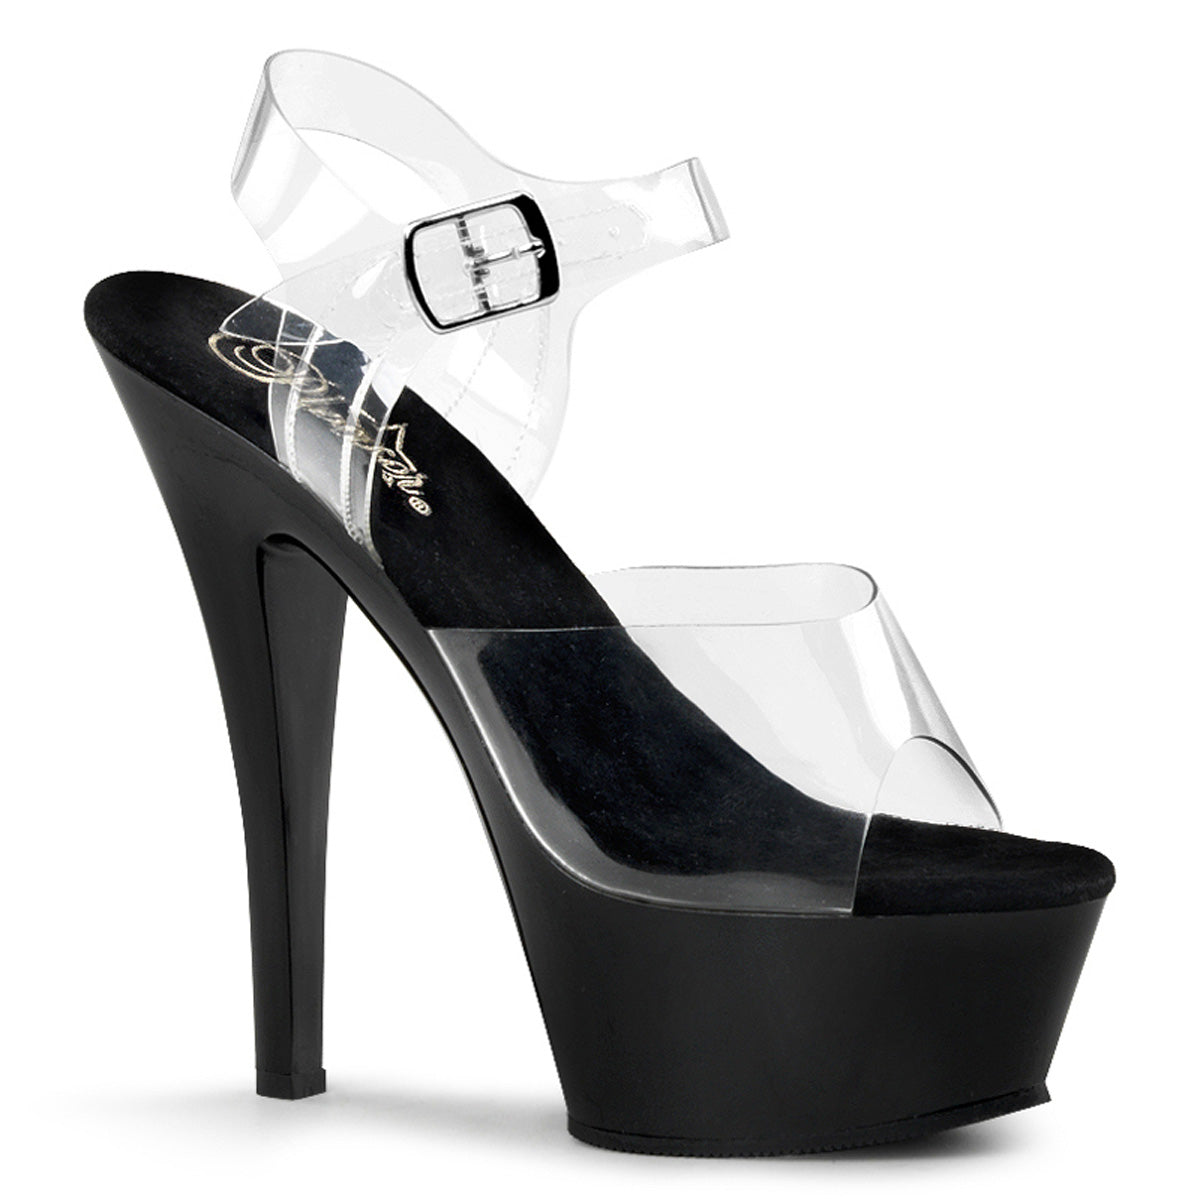 KISS-208 6" Heel Clear and Black Pole Dancing Platforms-Pleaser- Sexy Shoes